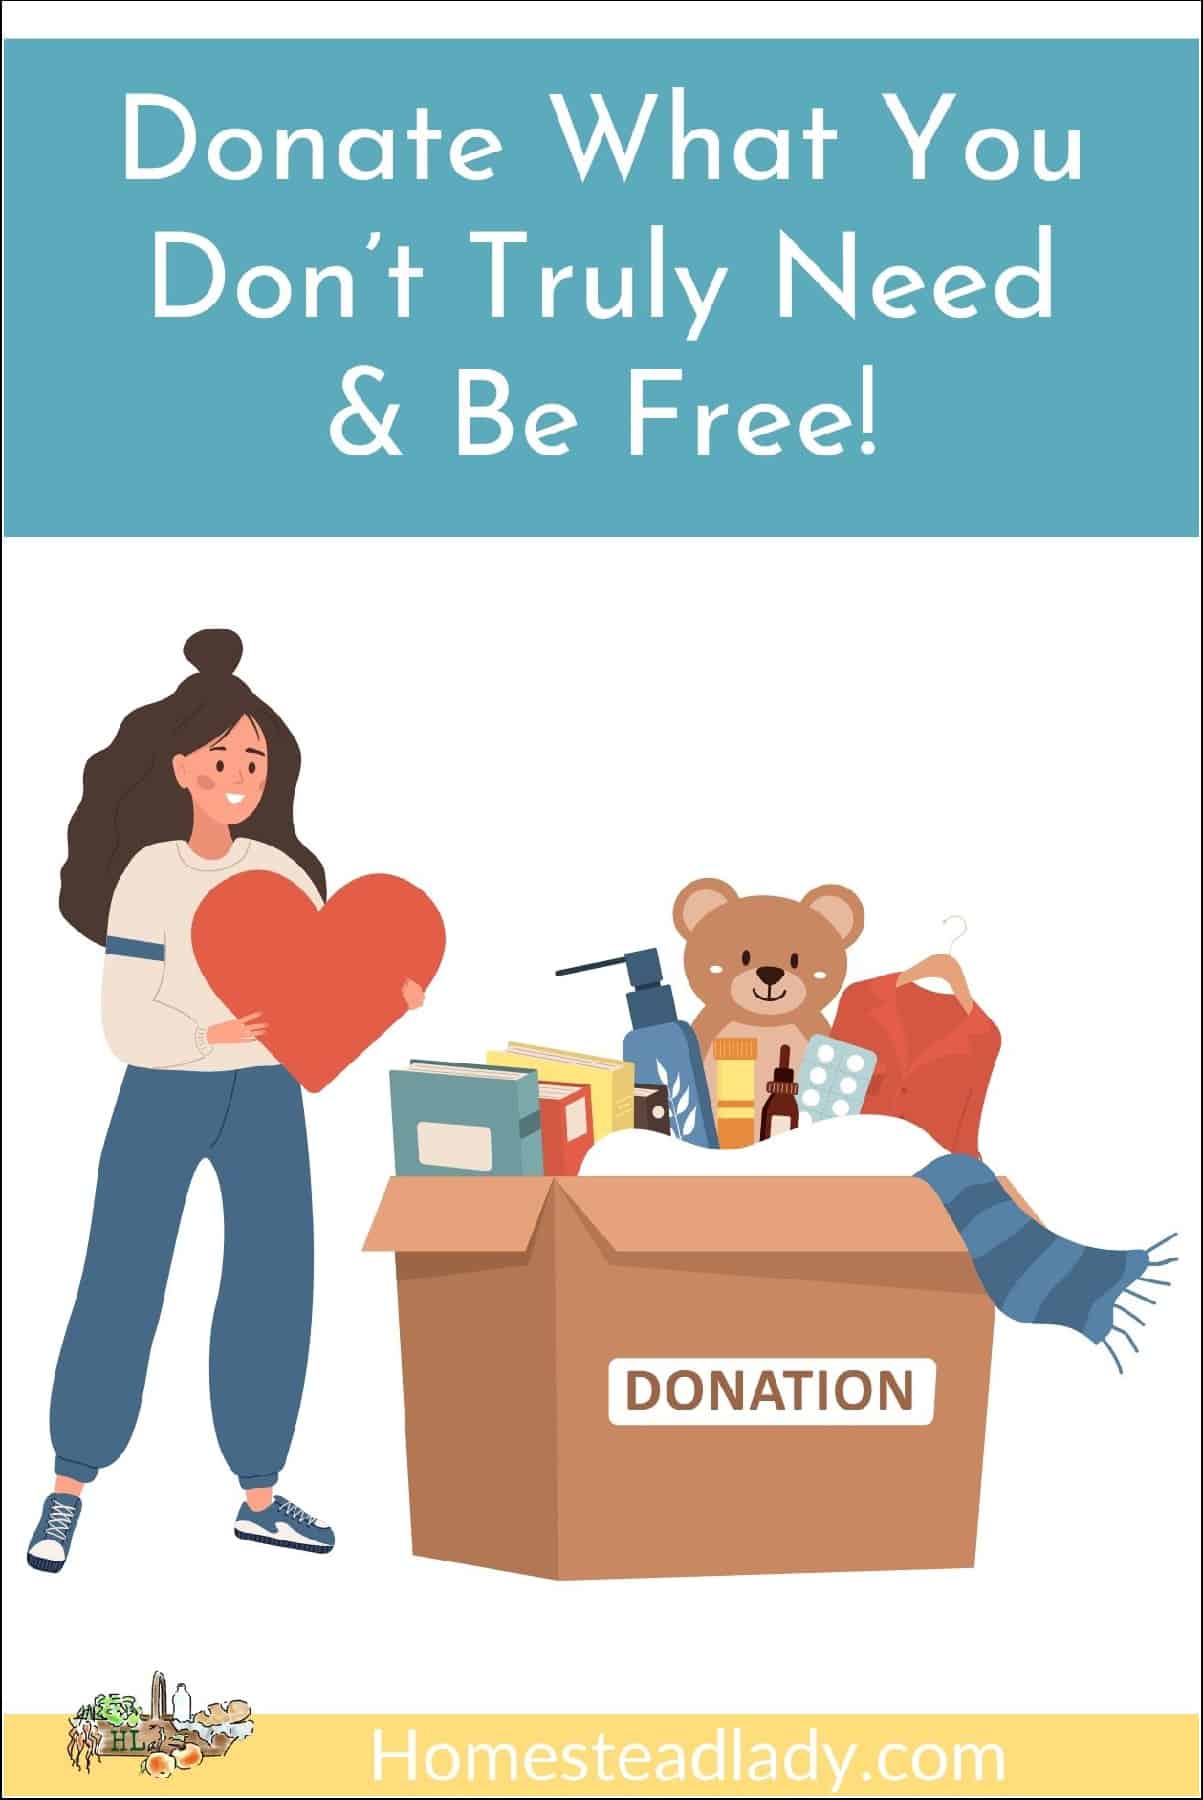 decorative, gather donations to declutter